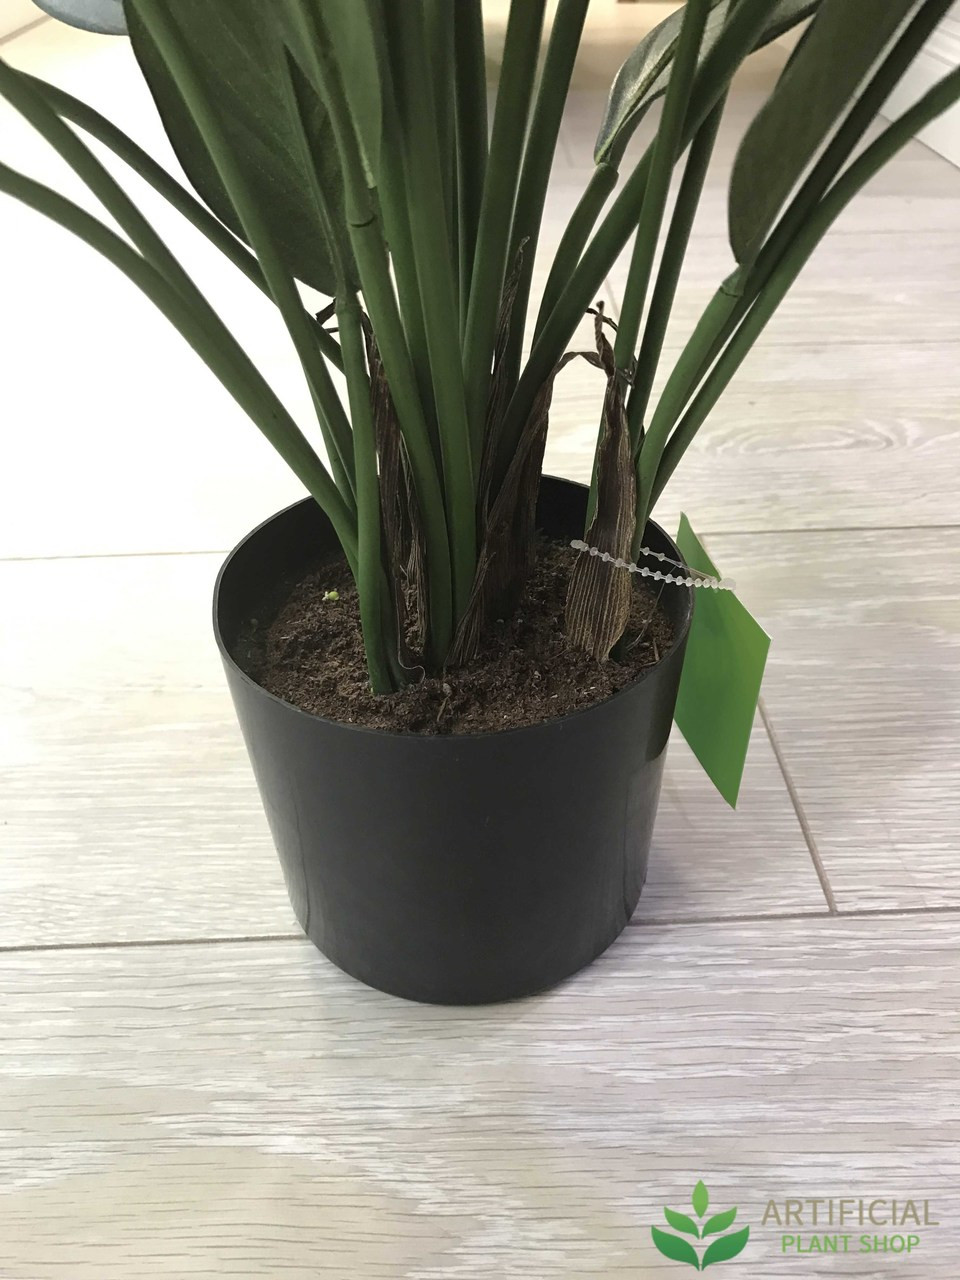 Artificial Lily plant stems